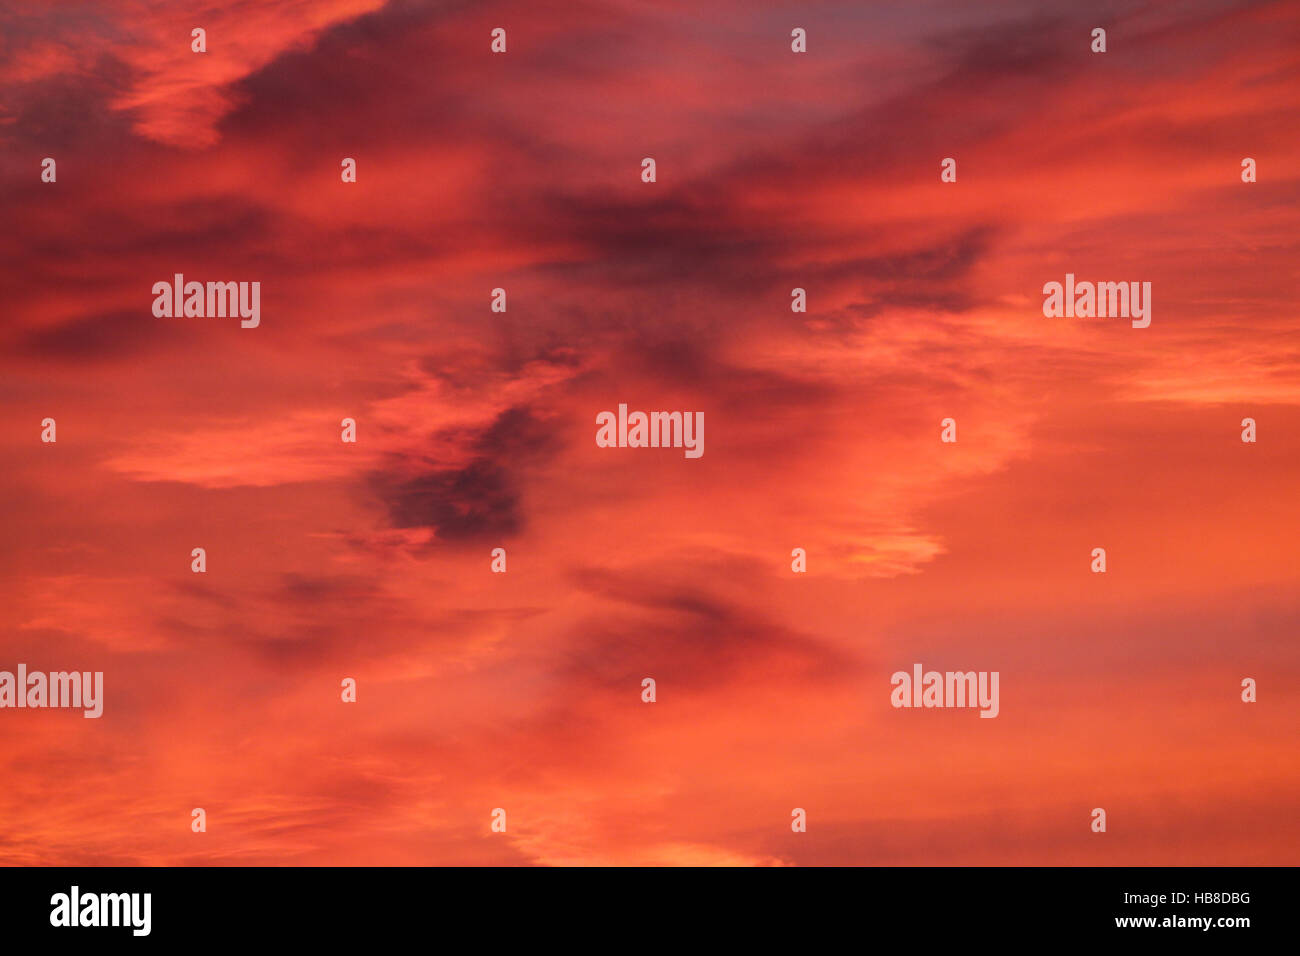 Orange red-stained cloudy sky after sunset, Allgäu, Bavaria, Germany Stock Photo